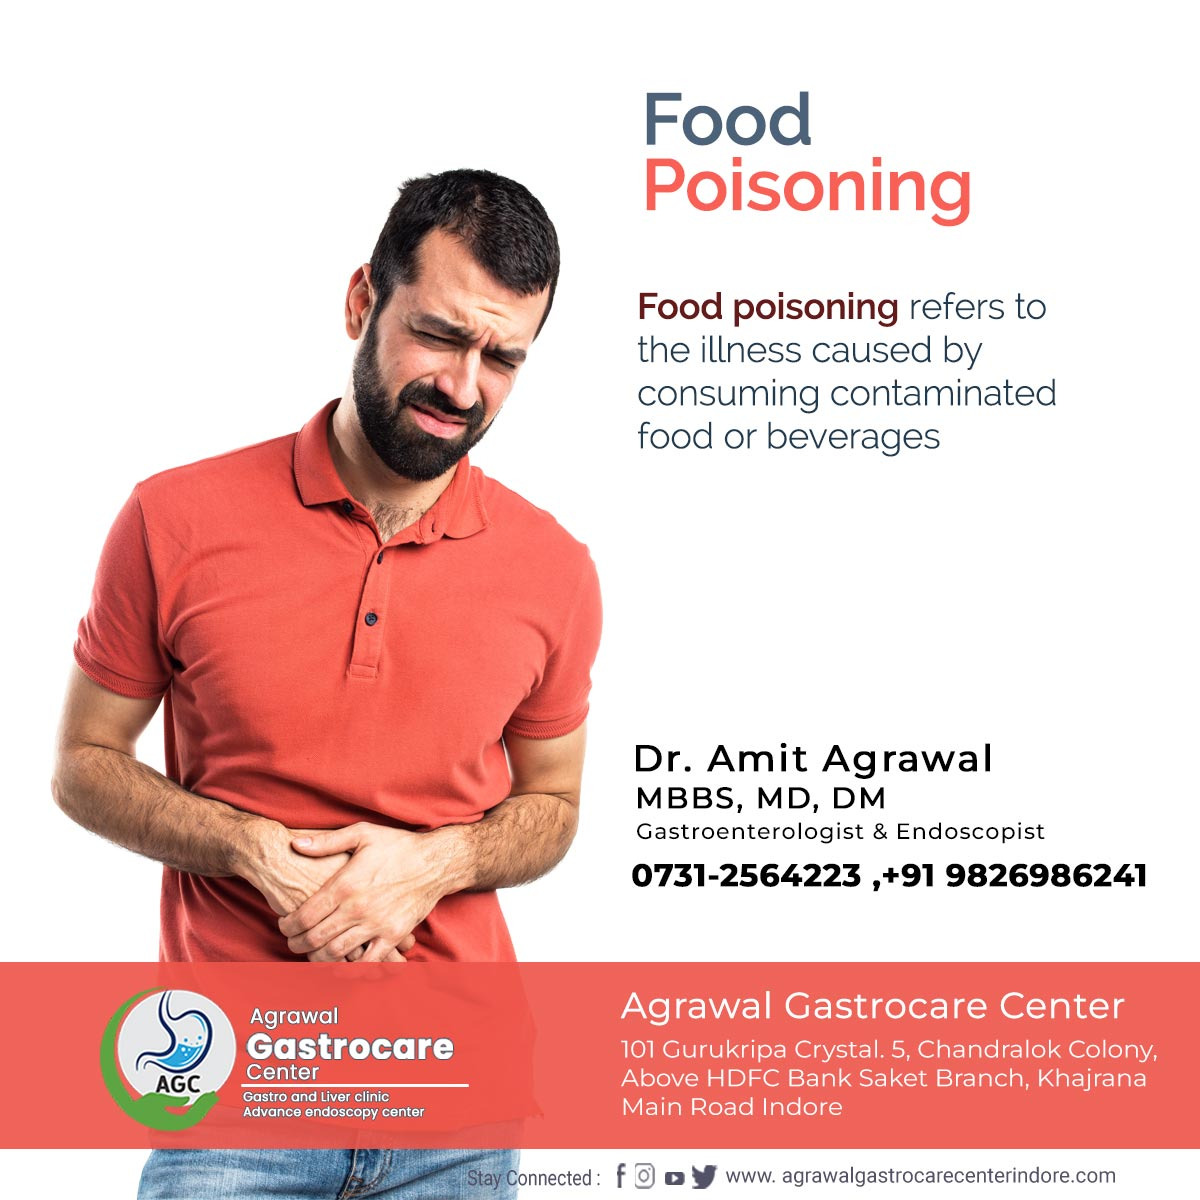 #Foodpoisoning refers to the #illness caused by consuming contaminated #food or #beverages. It occurs when harmful #bacteria, #viruses, #parasites, or #toxins are present in the food and ingested into the body.

visit lnkd.in/dUzngySB,
Call: 9826986241
#food #health